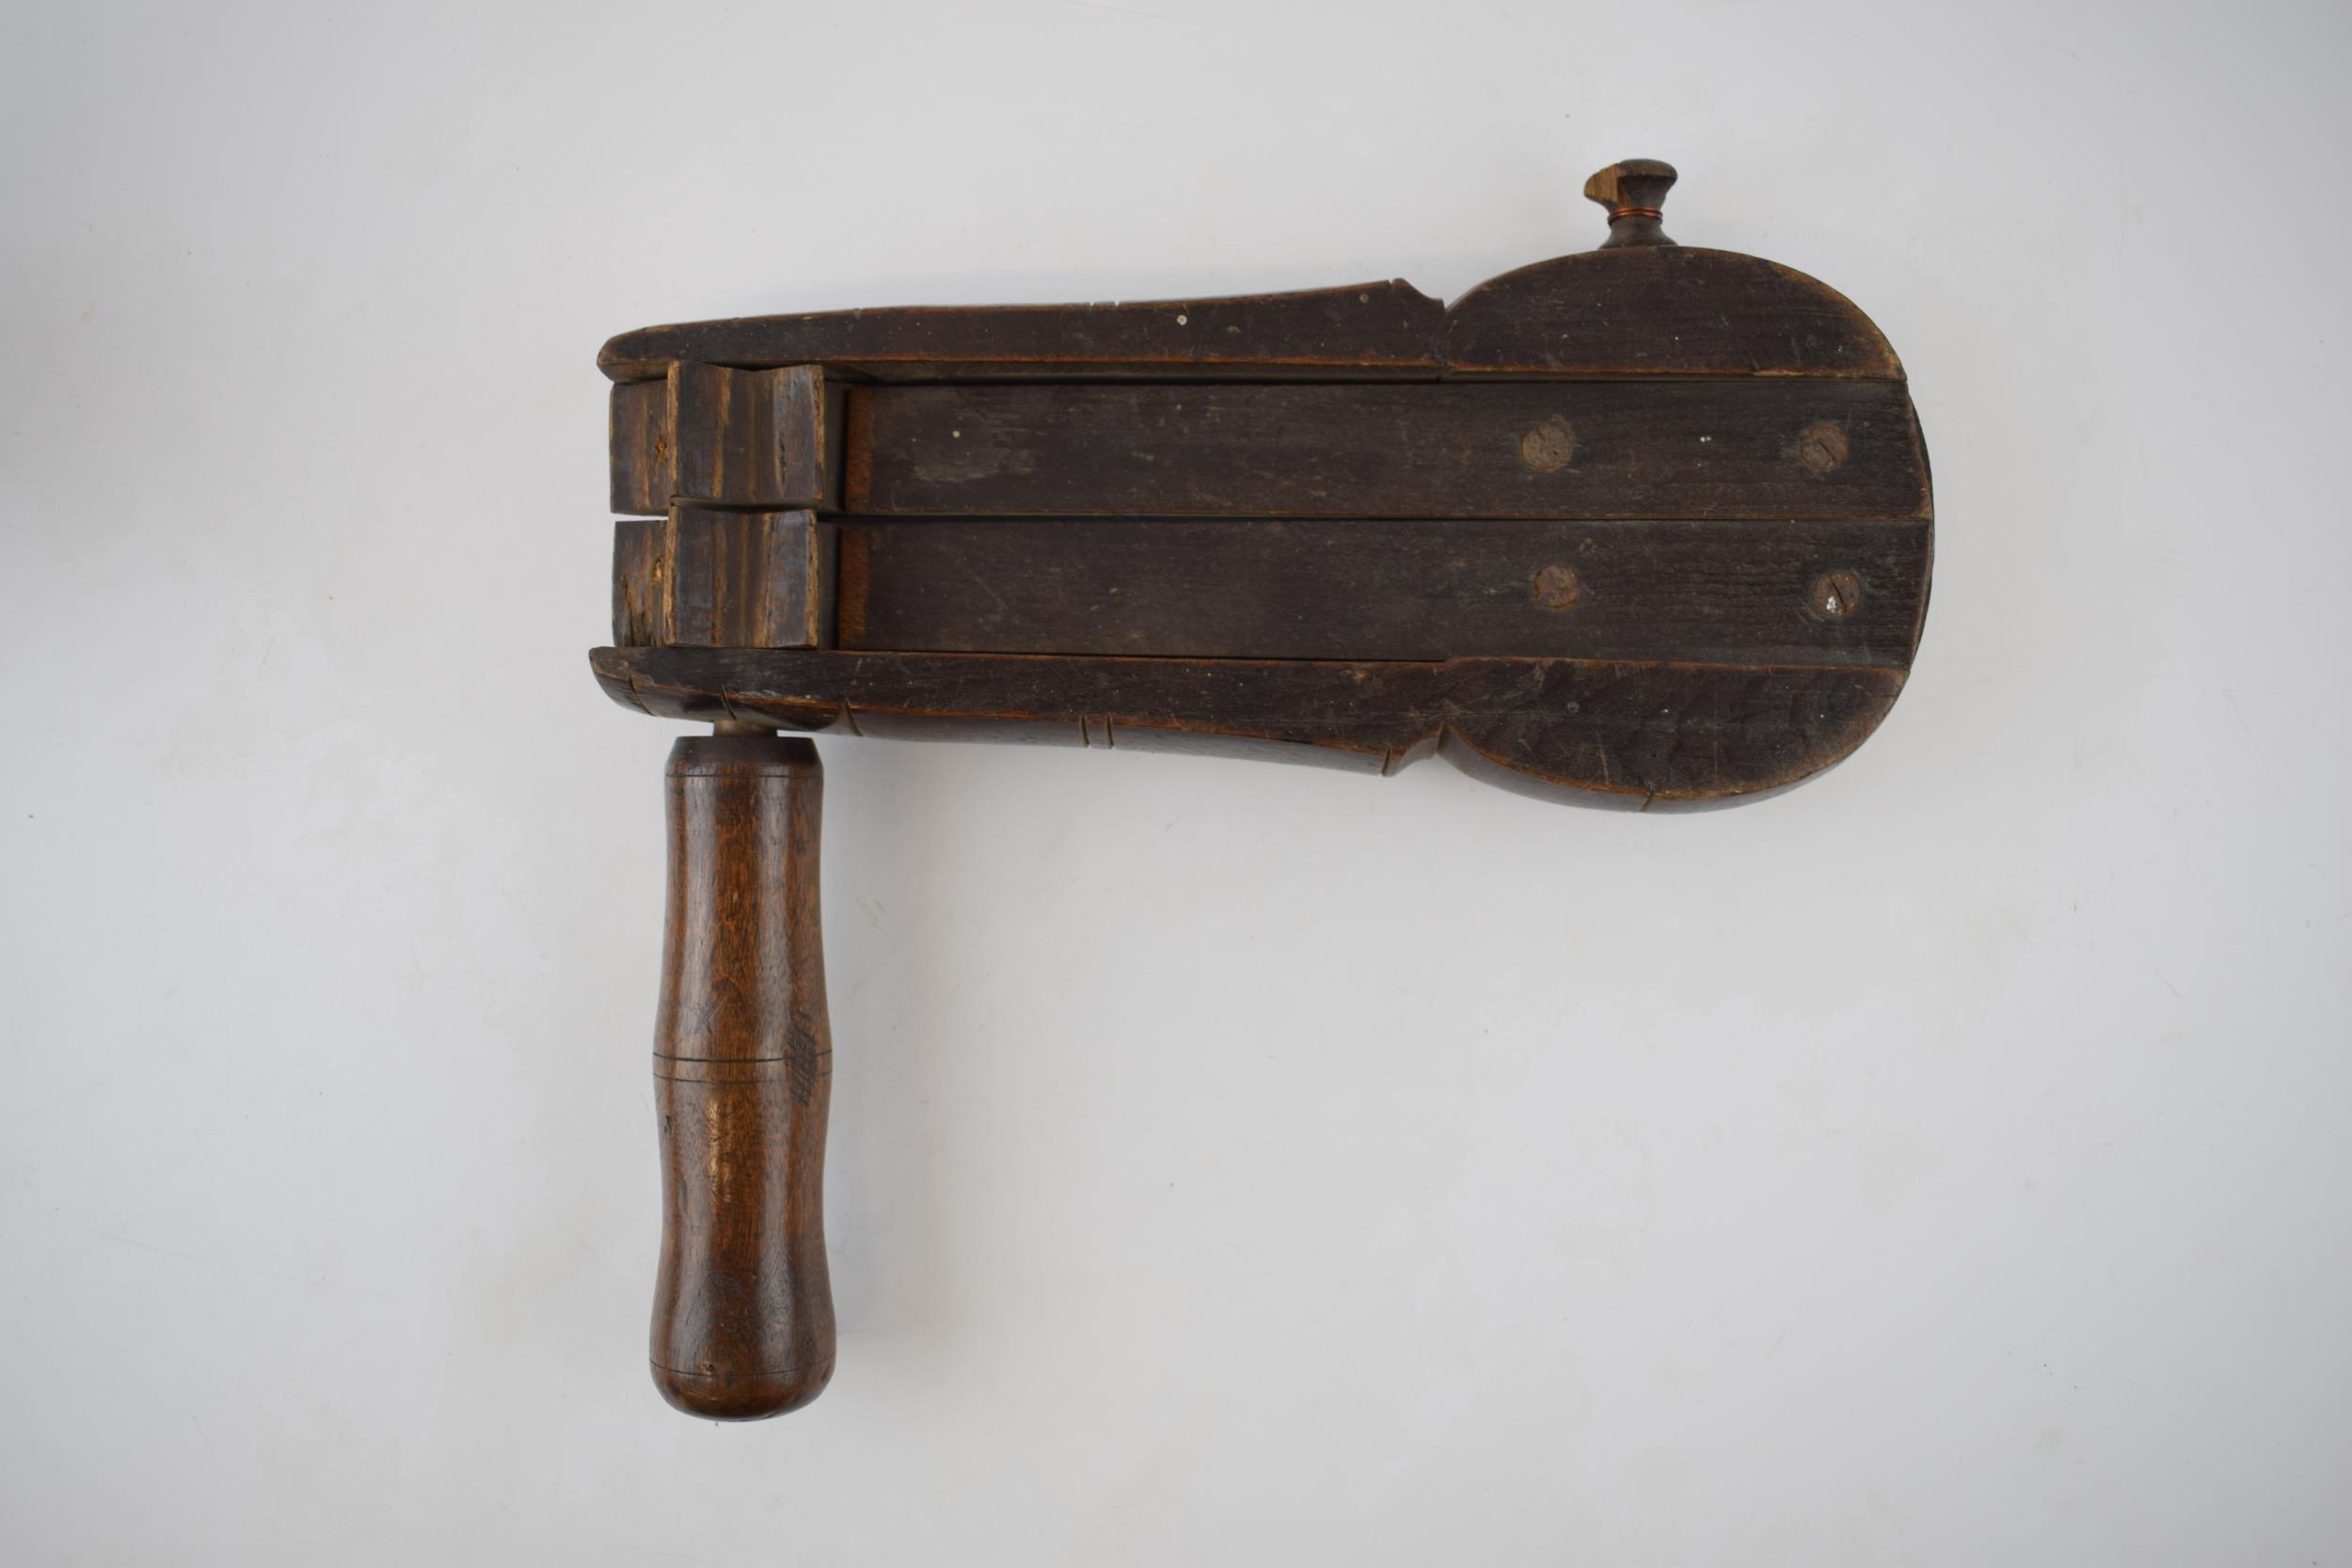 Treen Victorian birch police rattle with beech handle. Used by the metropolitan police prior to